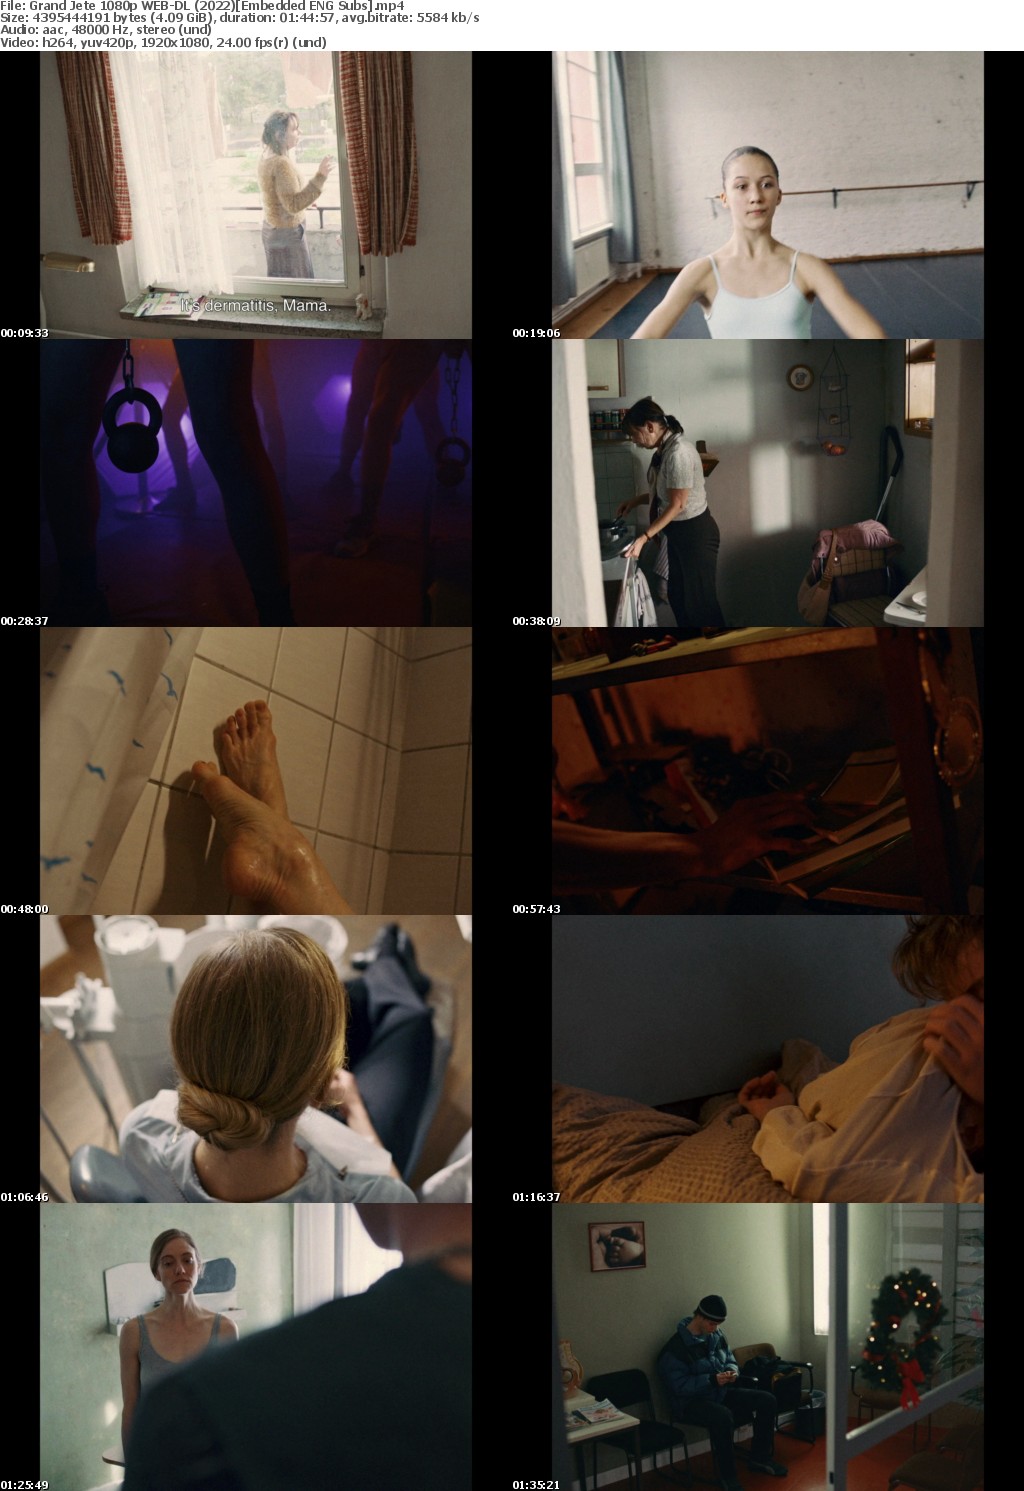 Grand Jete 1080p WEB-DL (2022) Embedded ENG Subs